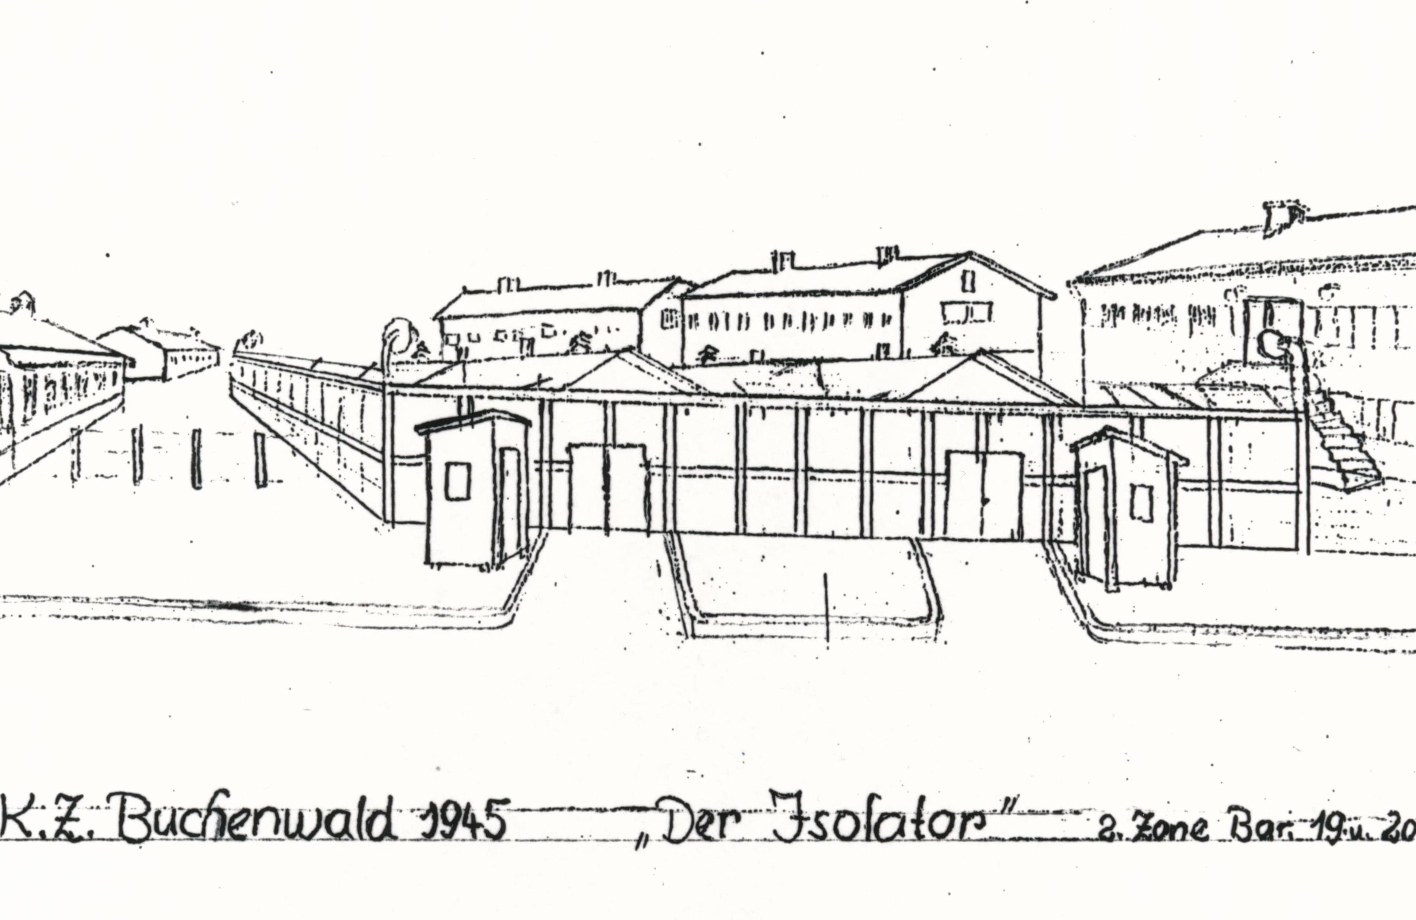 Drawing of the isolator. A separately fenced zone with barracks. The fence is high and opaque. Two small guard houses stand at two adjacent entrances. Directly behind the fence the roofs of flat barracks, behind them three larger multi-storey houses. Under the drawing is the writing: "K.Z. Buchenwald 1945 - The Isolator - 2nd Zone, Barracks 19 and 20".